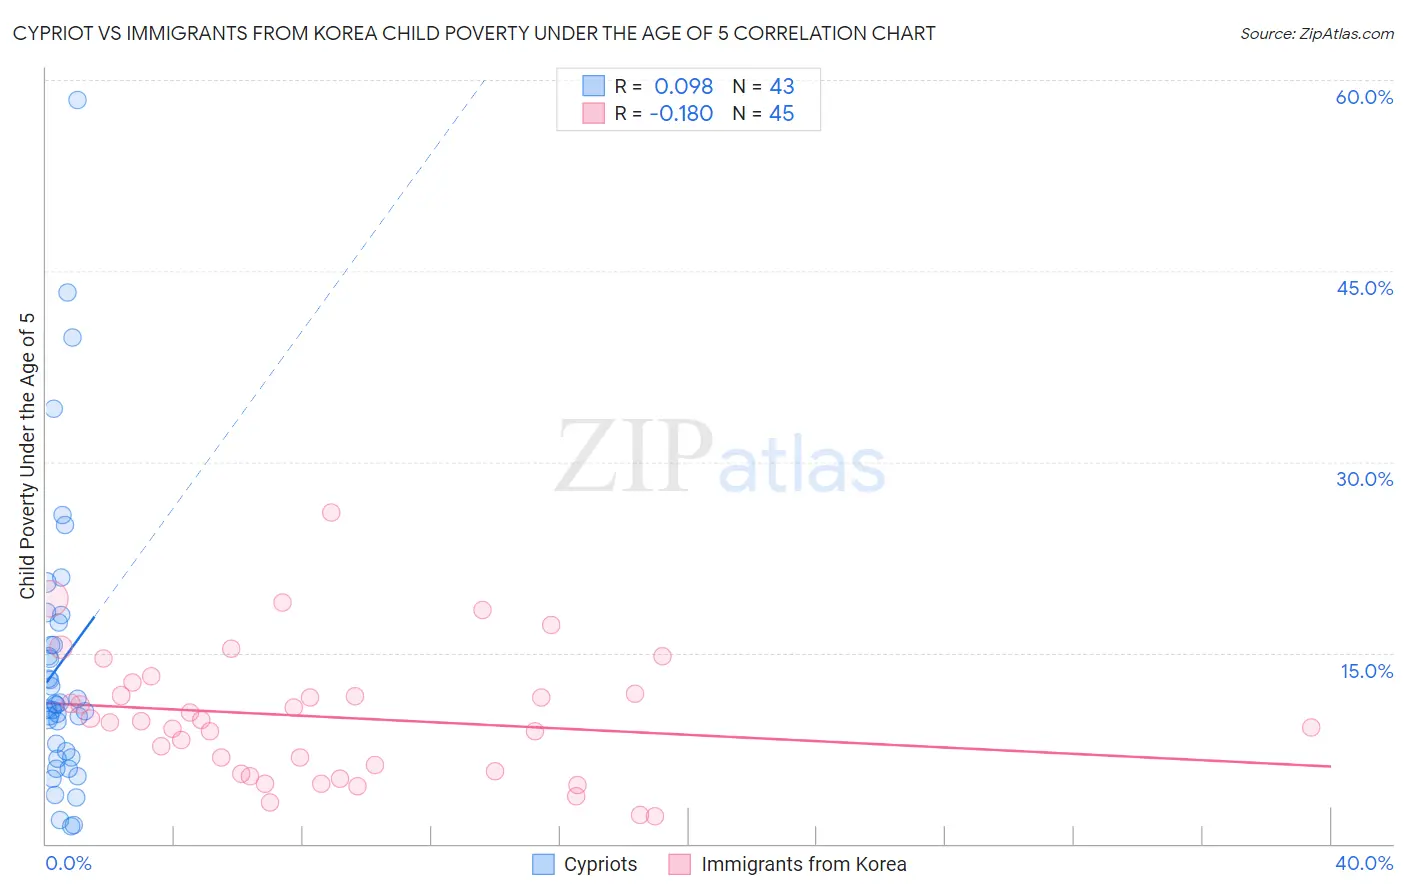 Cypriot vs Immigrants from Korea Child Poverty Under the Age of 5